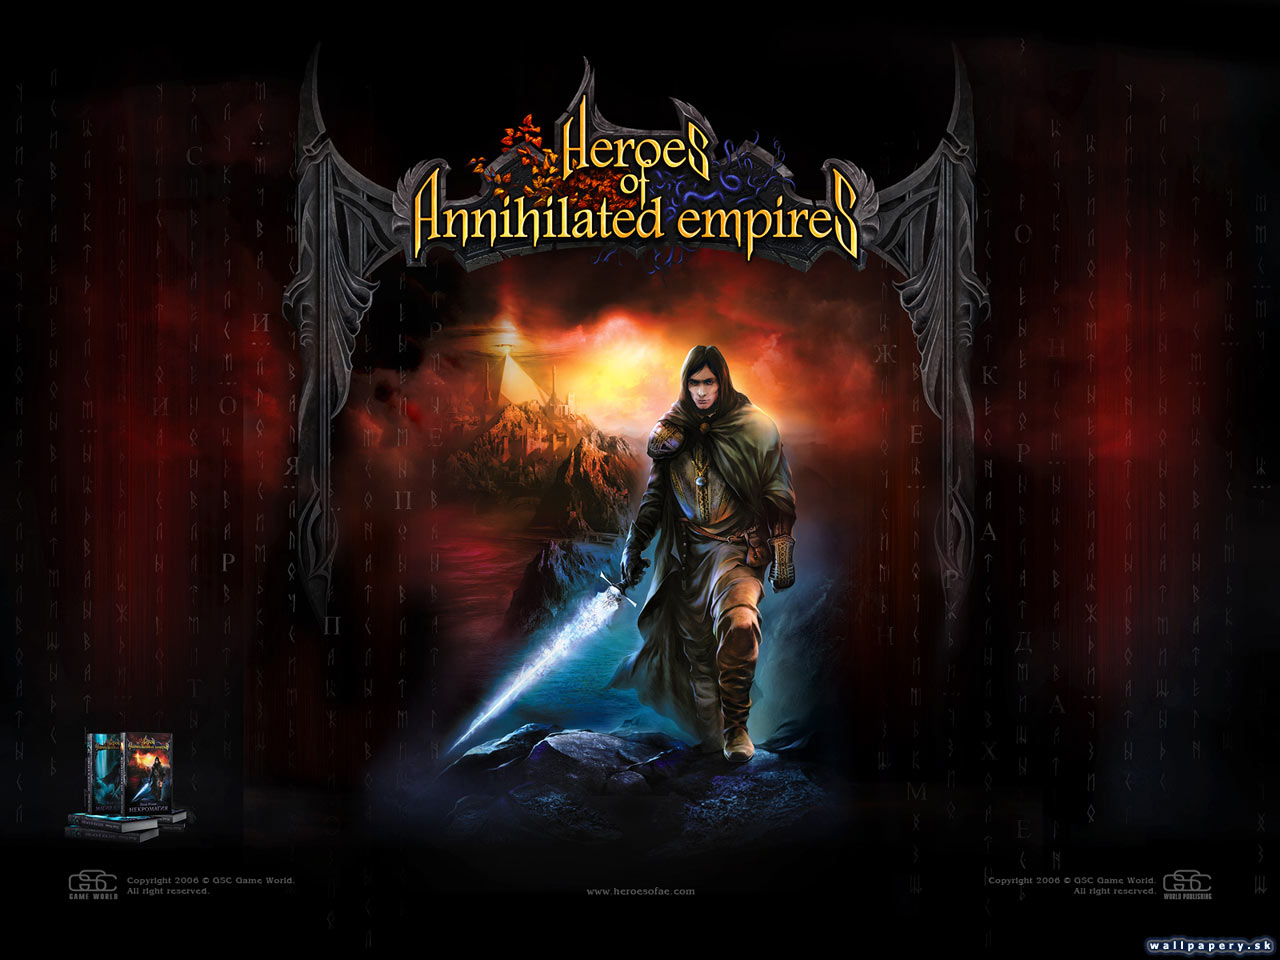 Heroes of Annihilated Empires - wallpaper 6